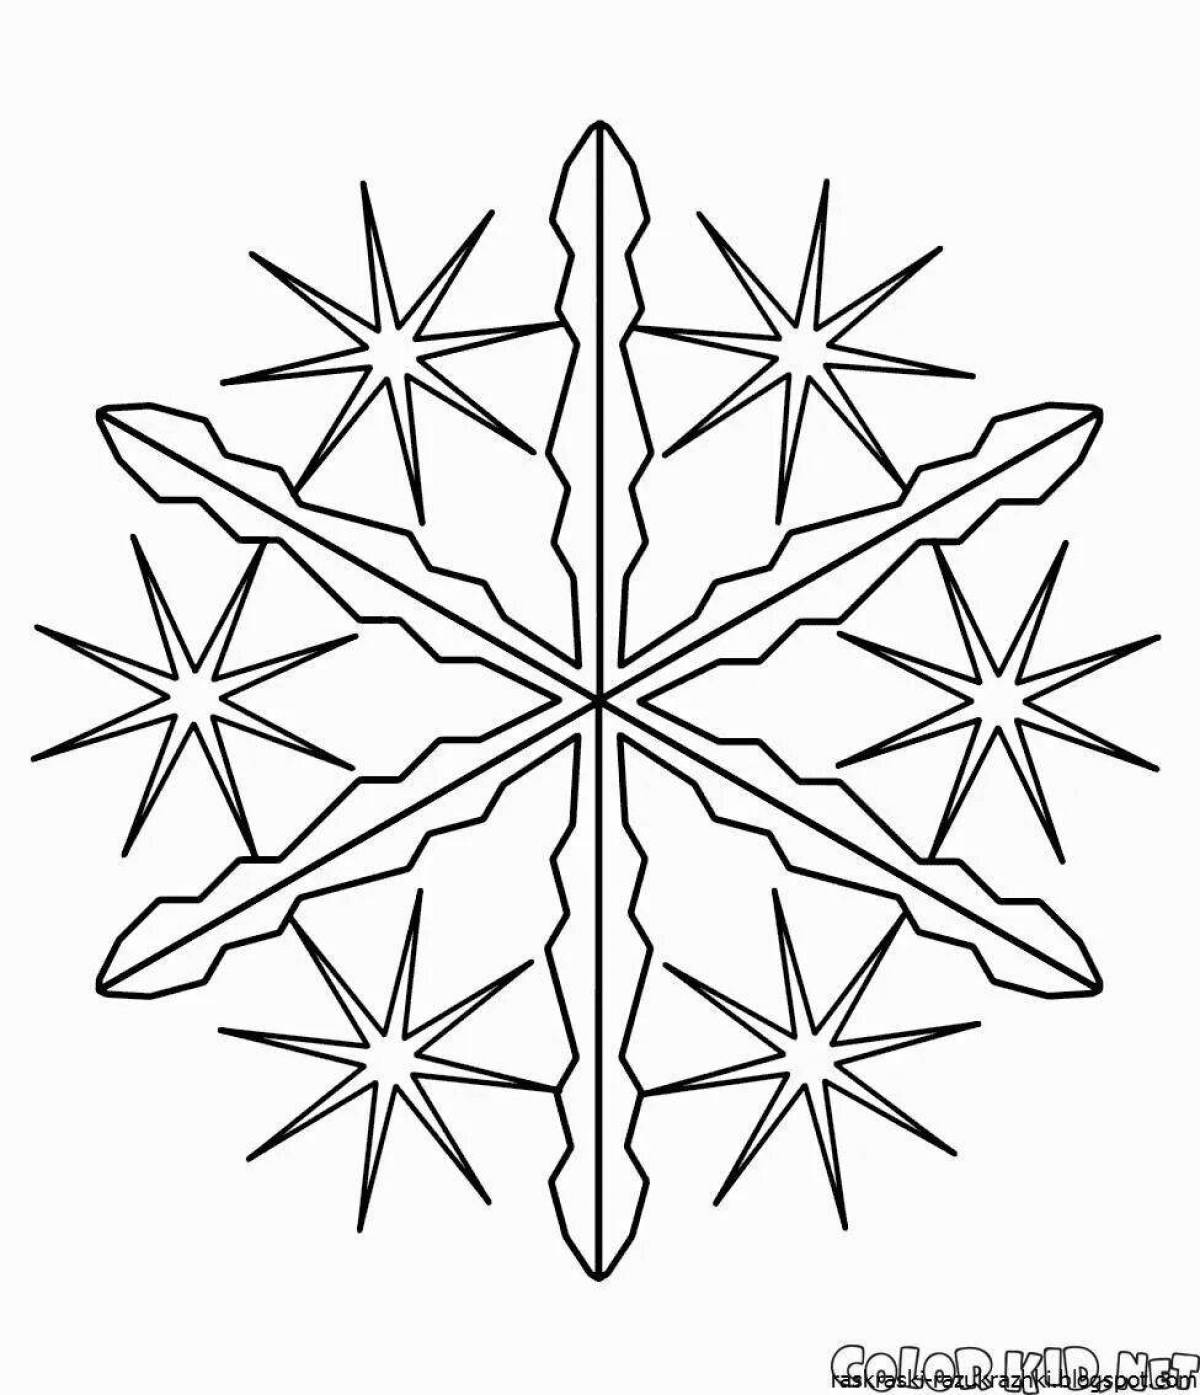 Snowflake live coloring for kids